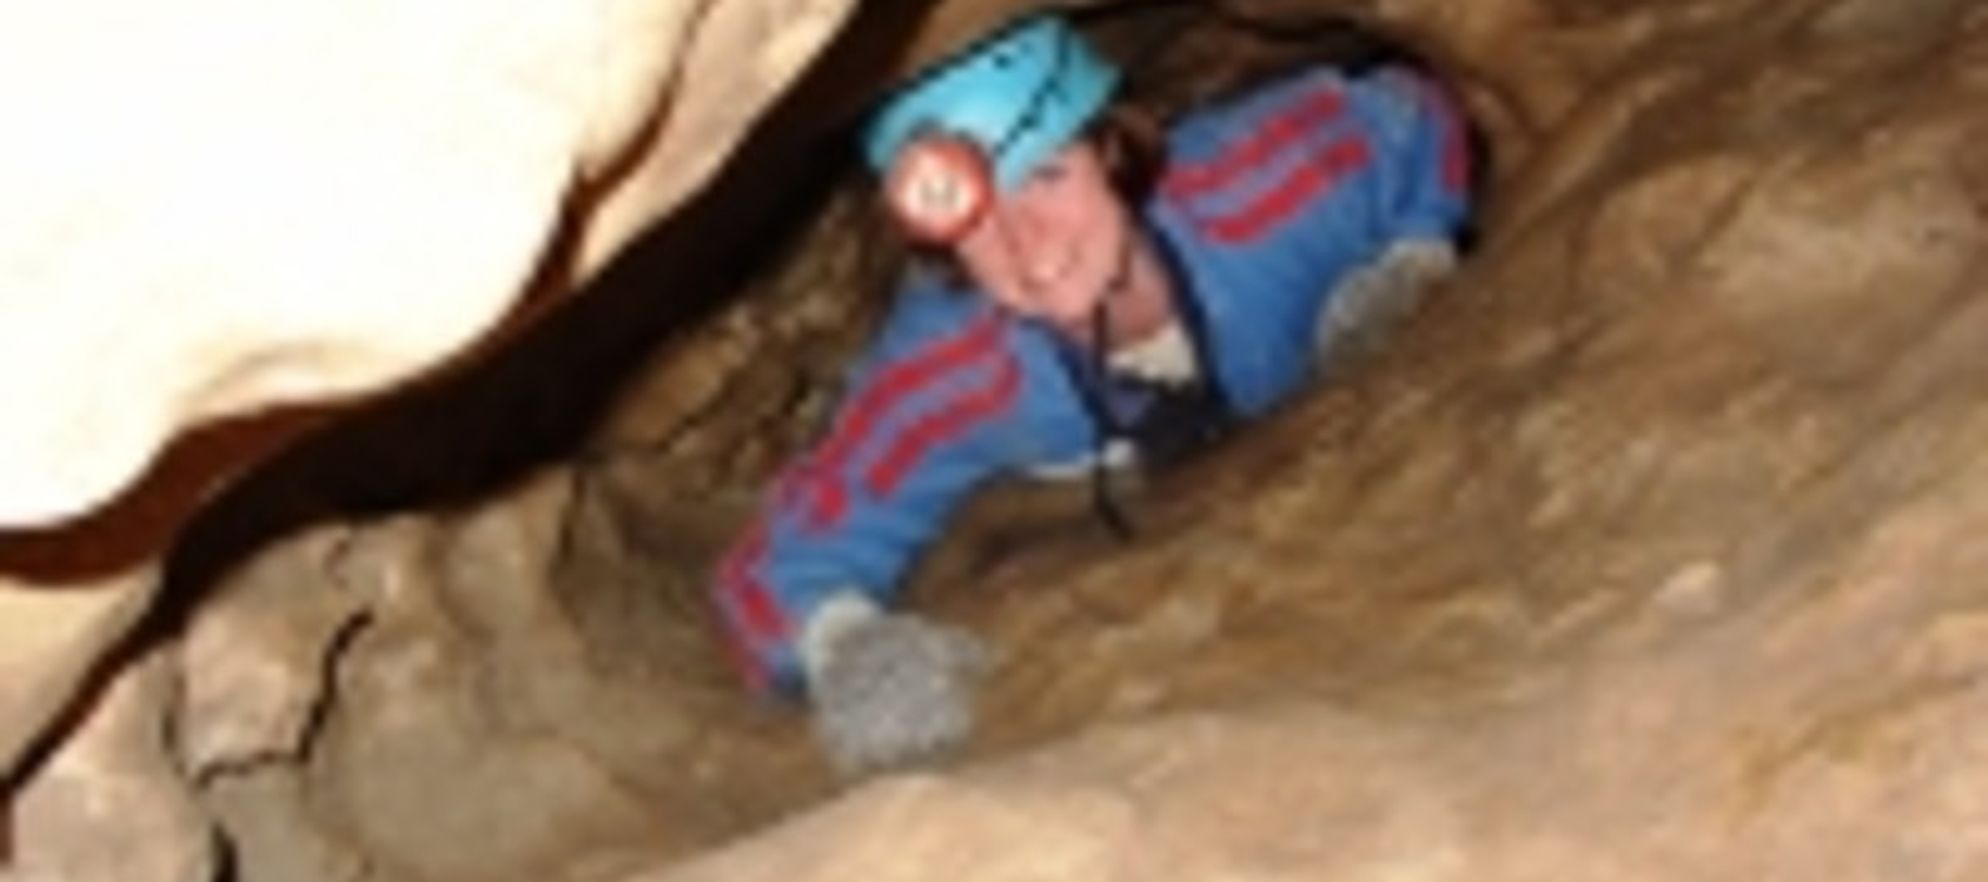 Canmore Cave Tours